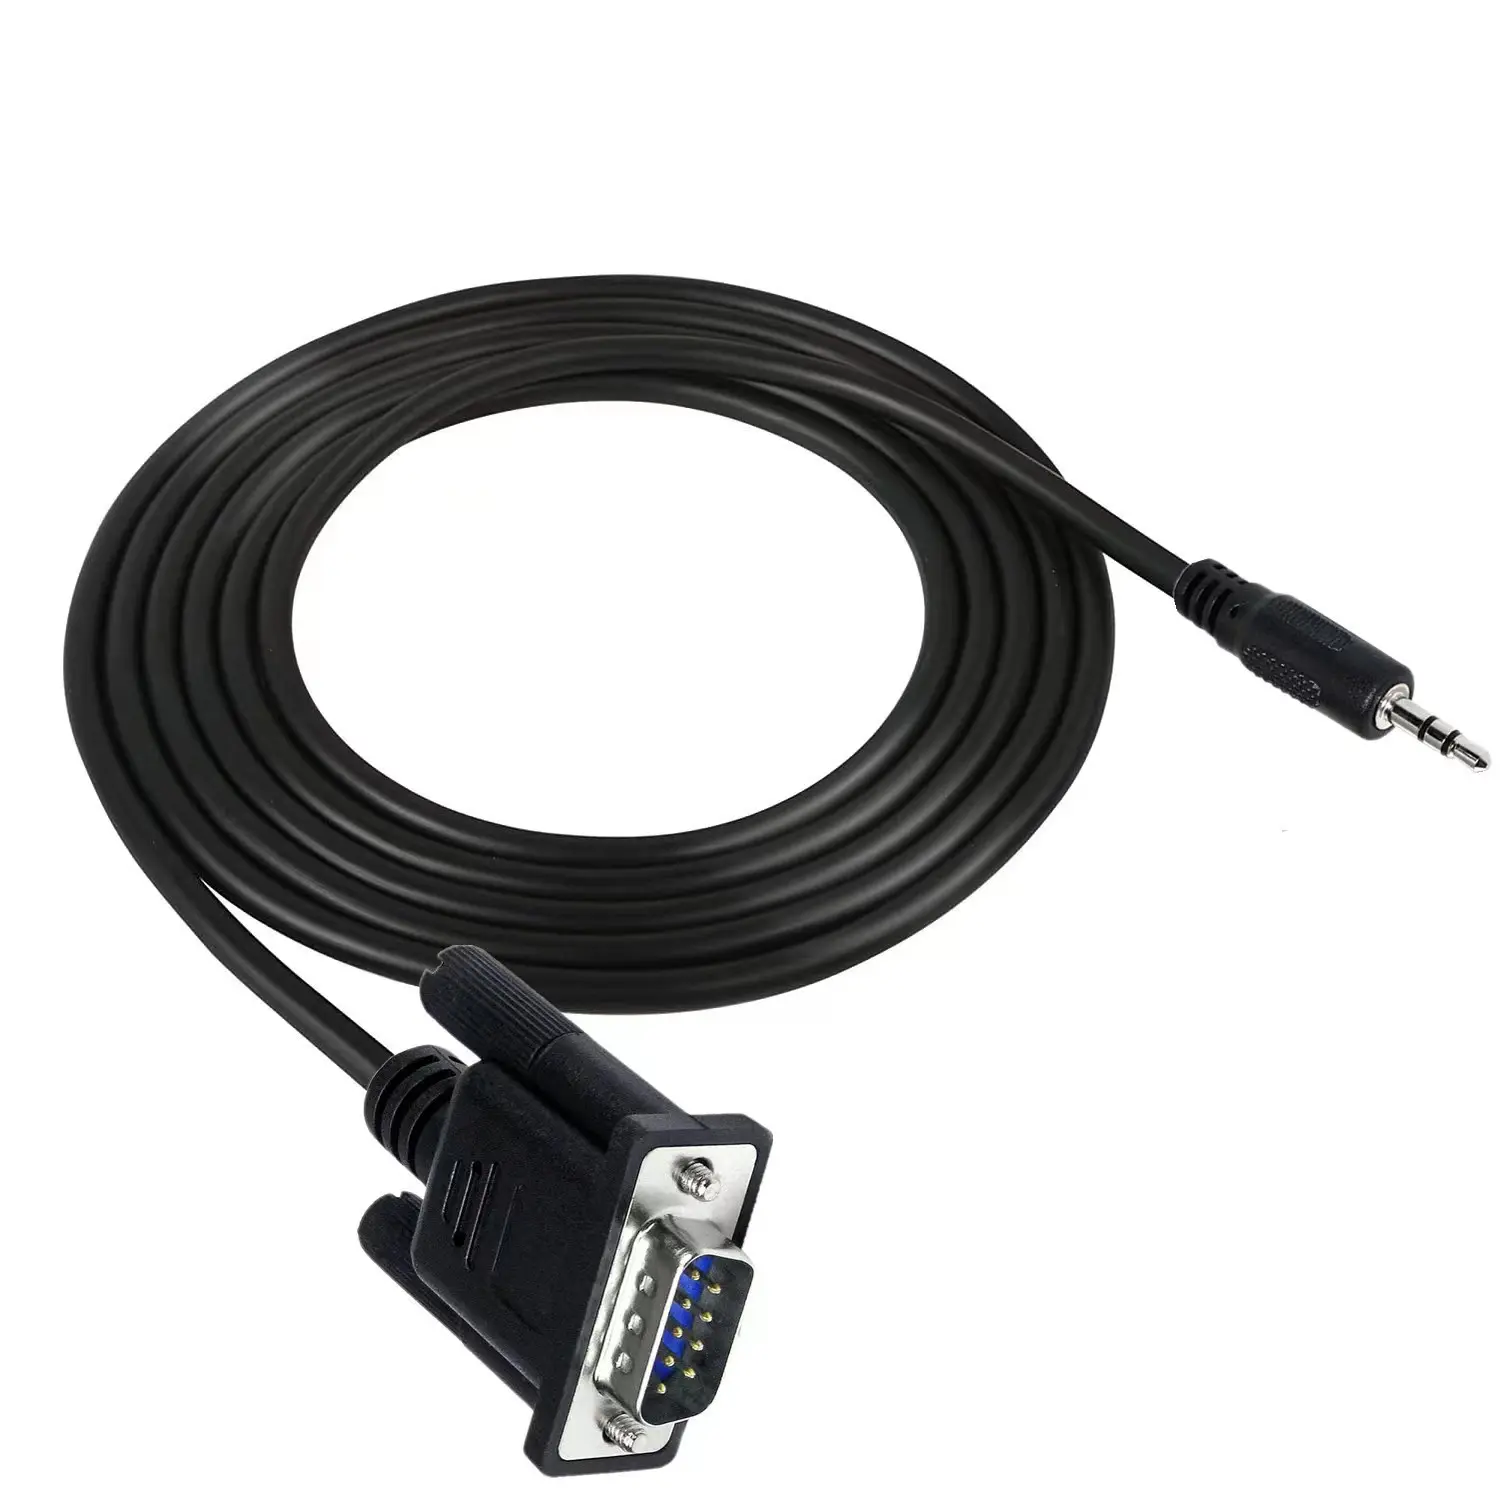 DB9 9 Pin male to 3.5mm Male Plug Serial Cable RS232 to 1/8 inch Conversion Cable Cord- 6FT/1.8M